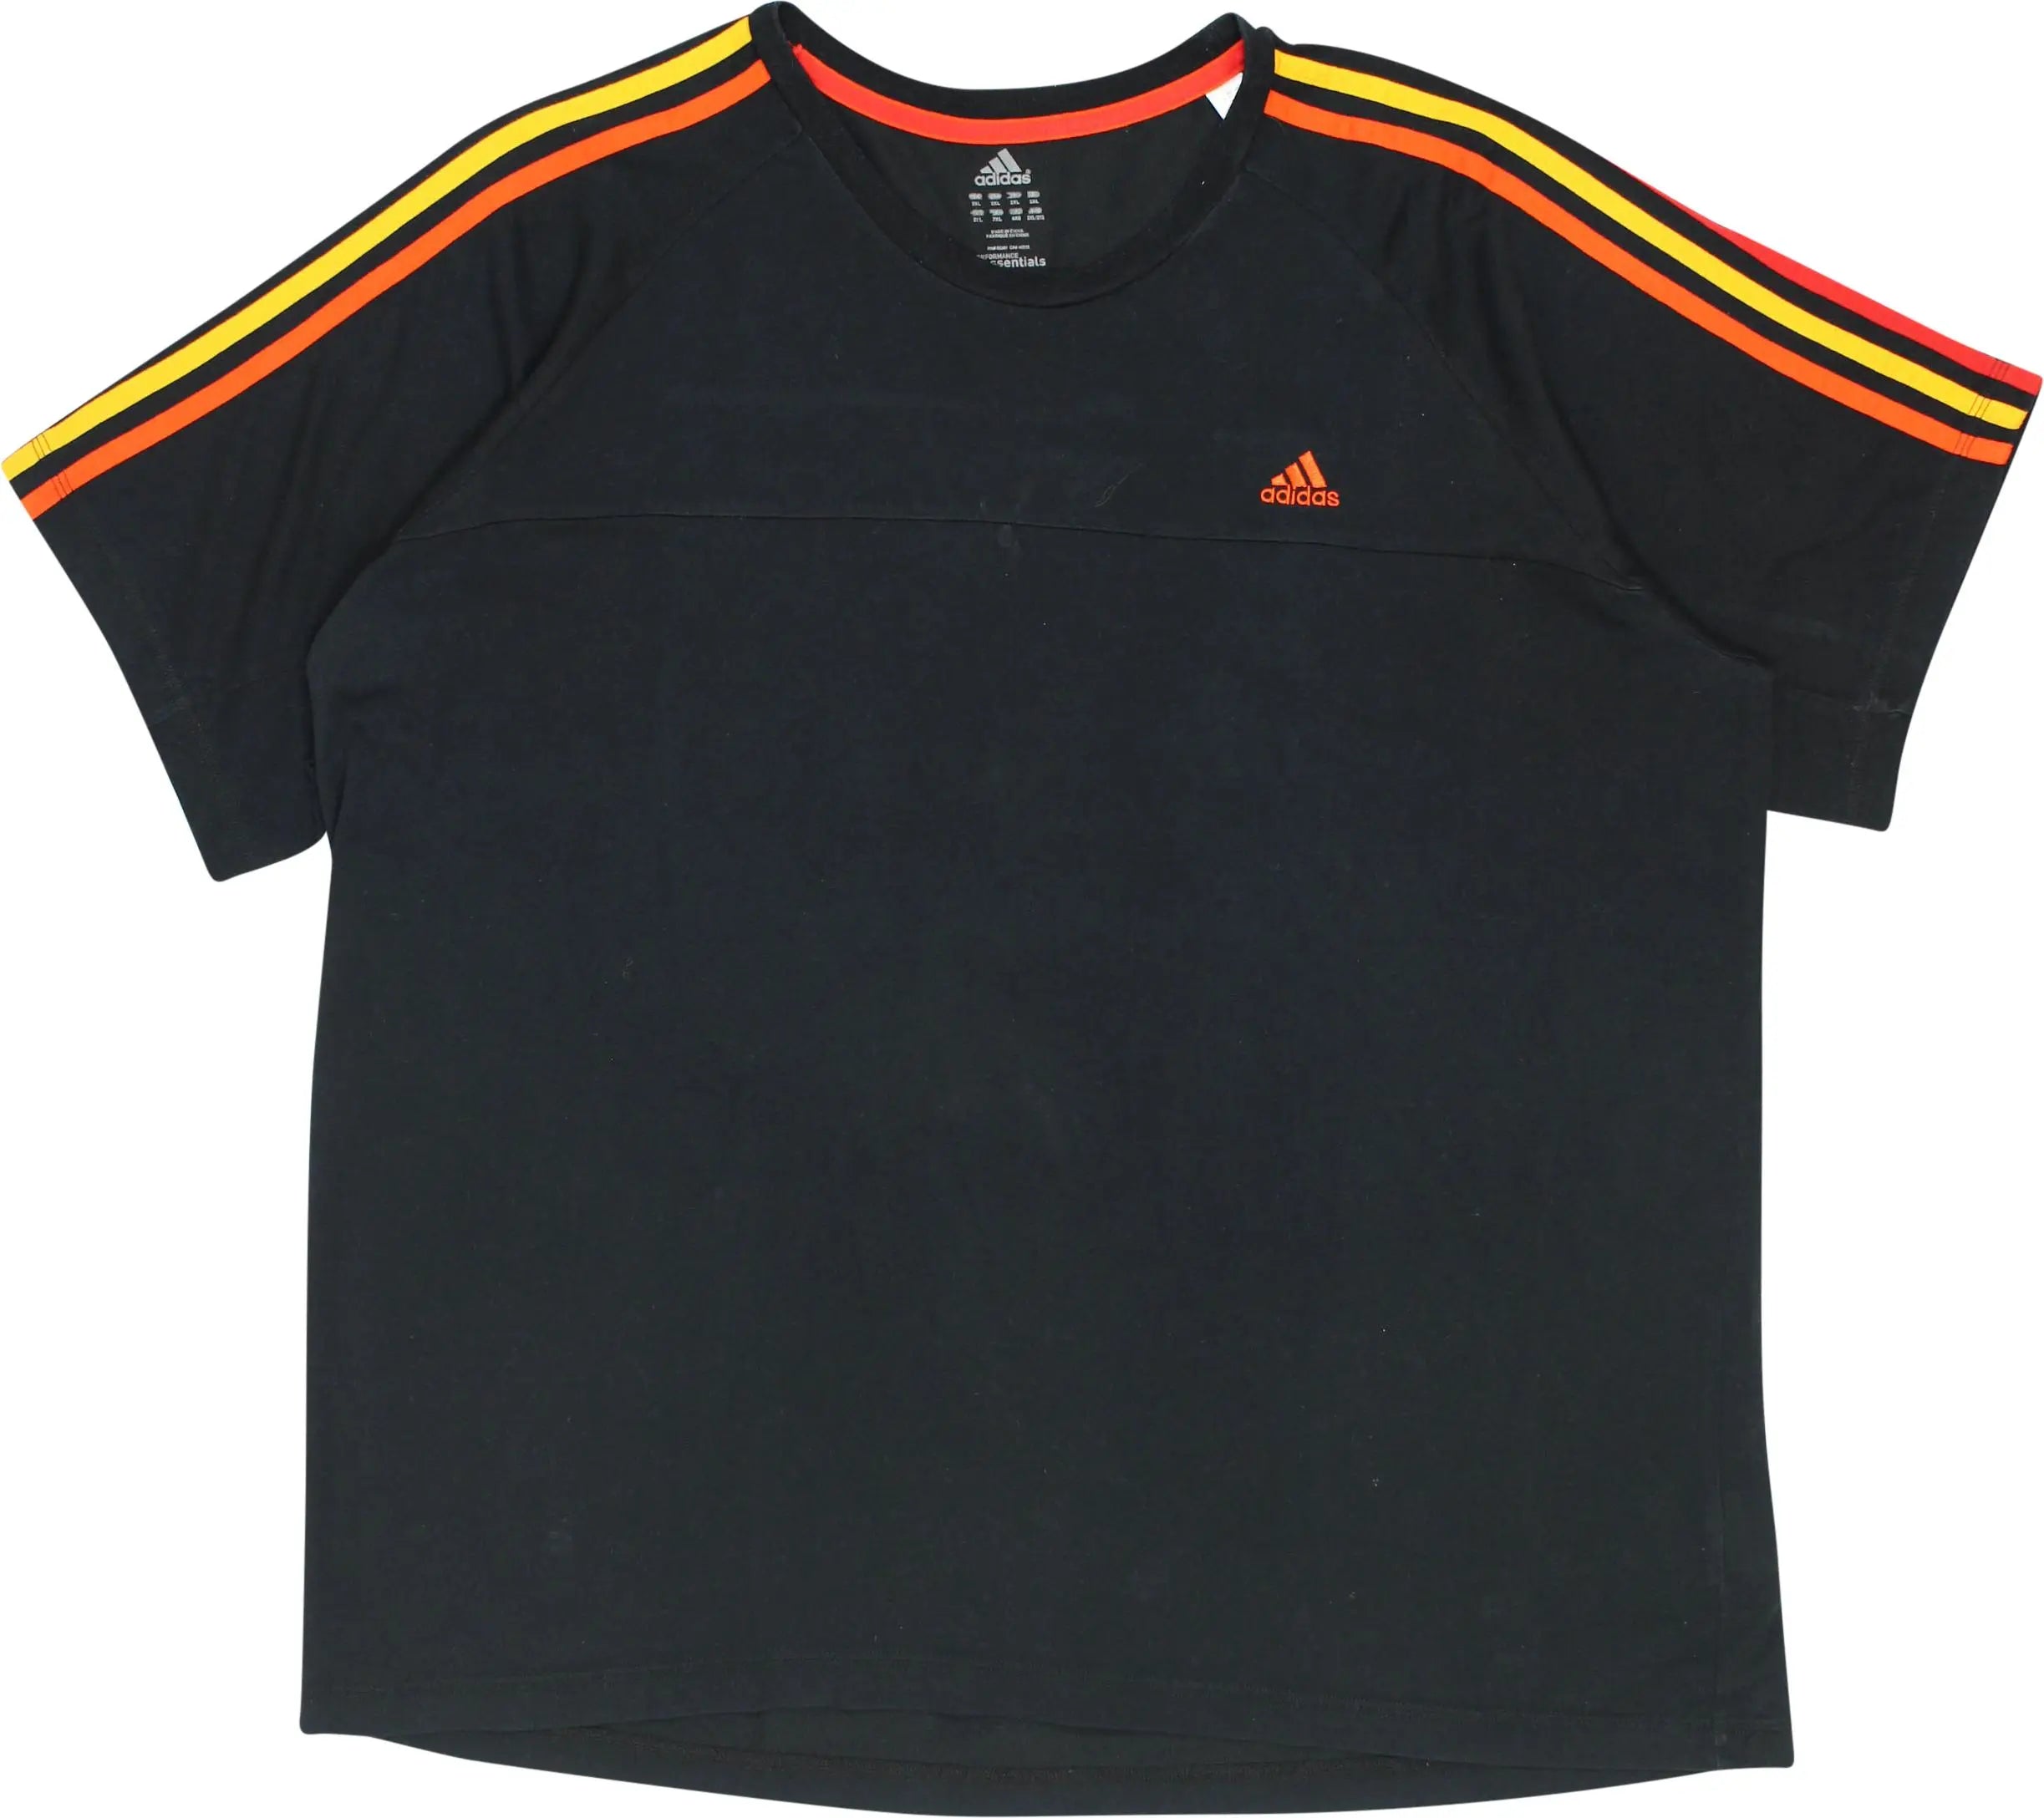 Adidas - Black Adidas T-shirt- ThriftTale.com - Vintage and second handclothing